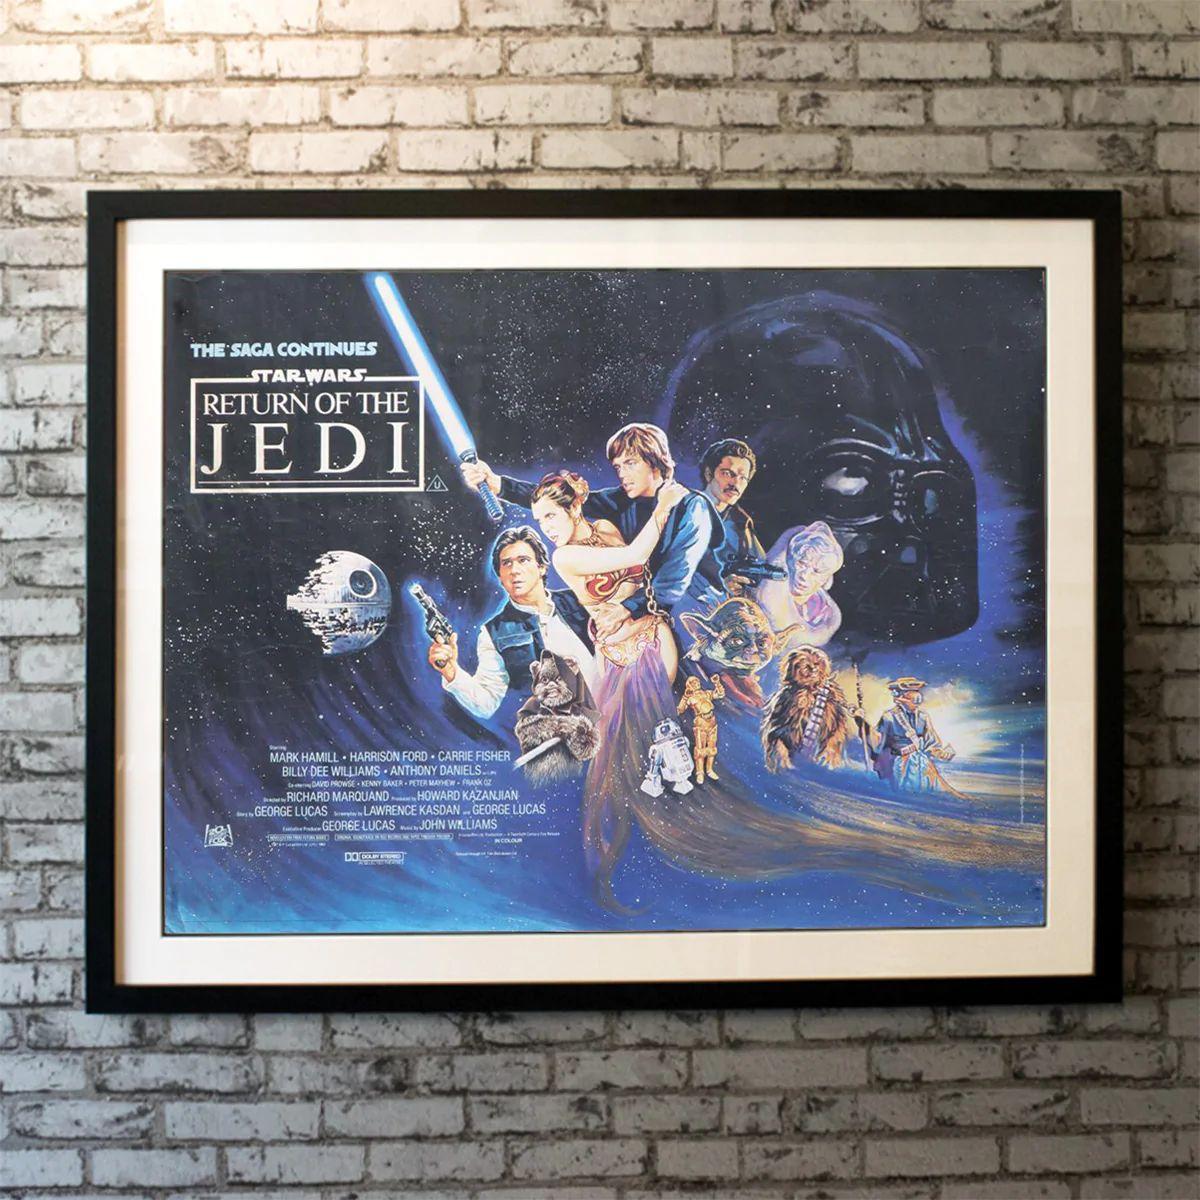 Return Of The Jedi, unframed poster, 1983

Episode VI- Return of the Jedi ends the Star Wars trilogy on a strong note and was nominated for 4 oscars. There were two versions of the UK quad - the earlier version omitted several characters and these